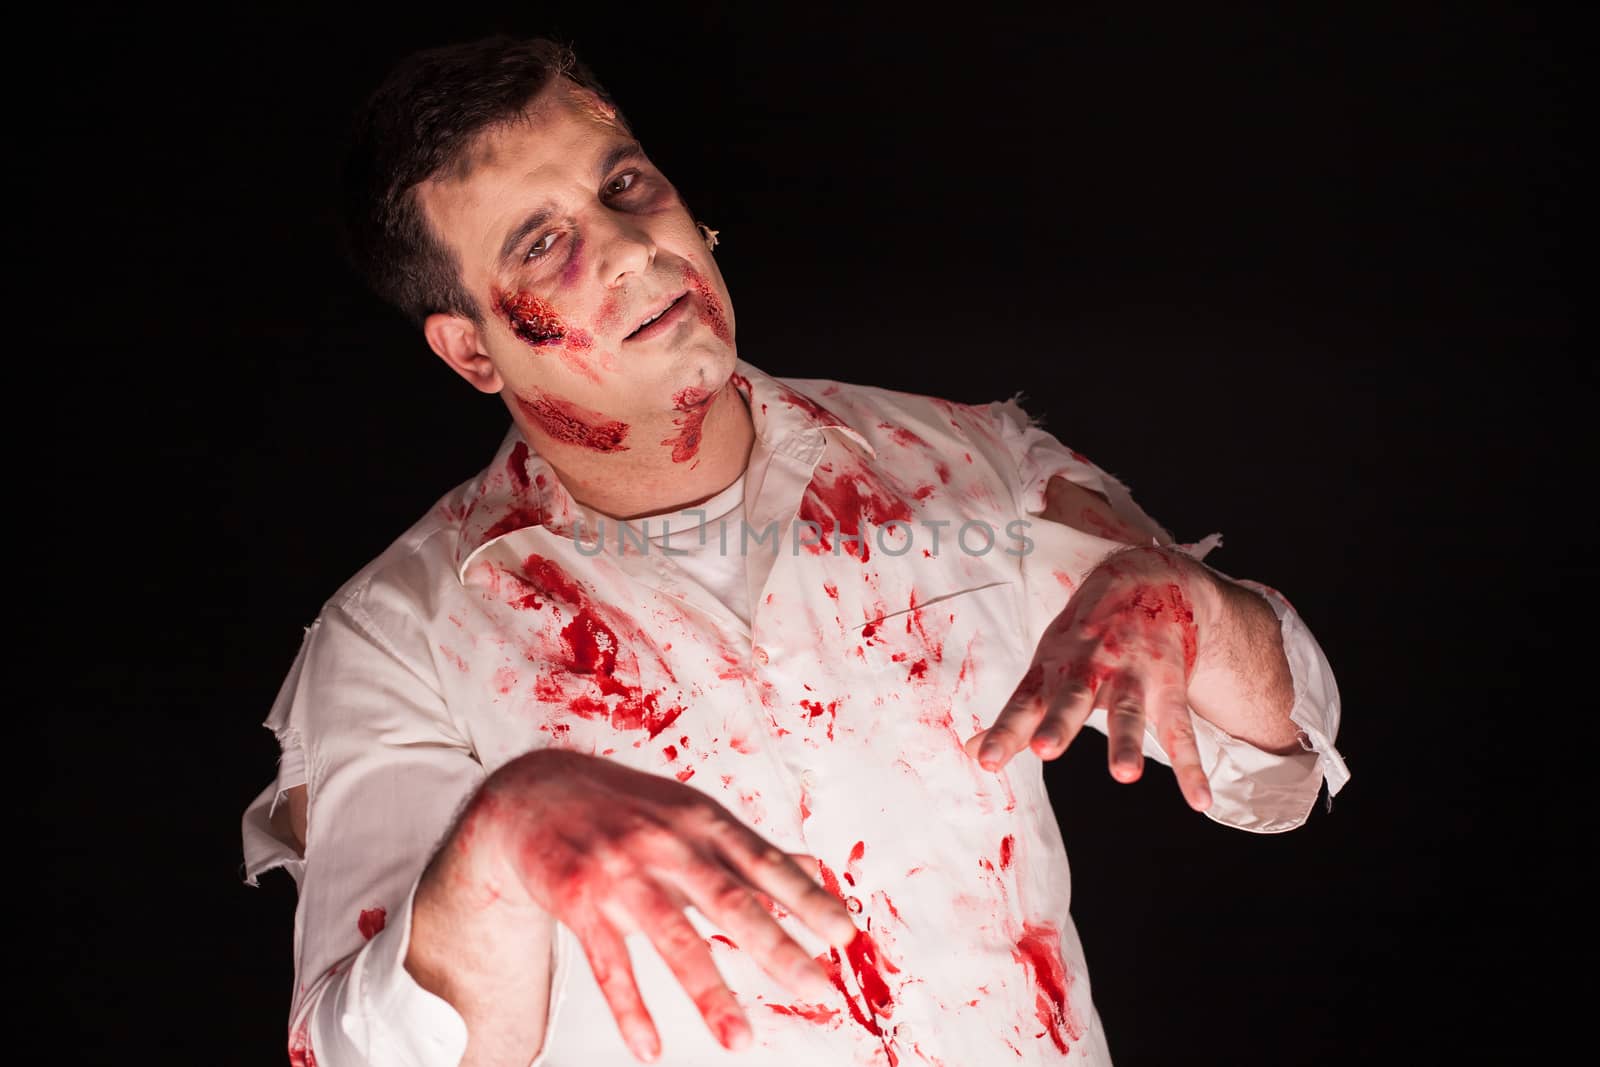 Violent zombie with bloody creative make up over black background by DCStudio